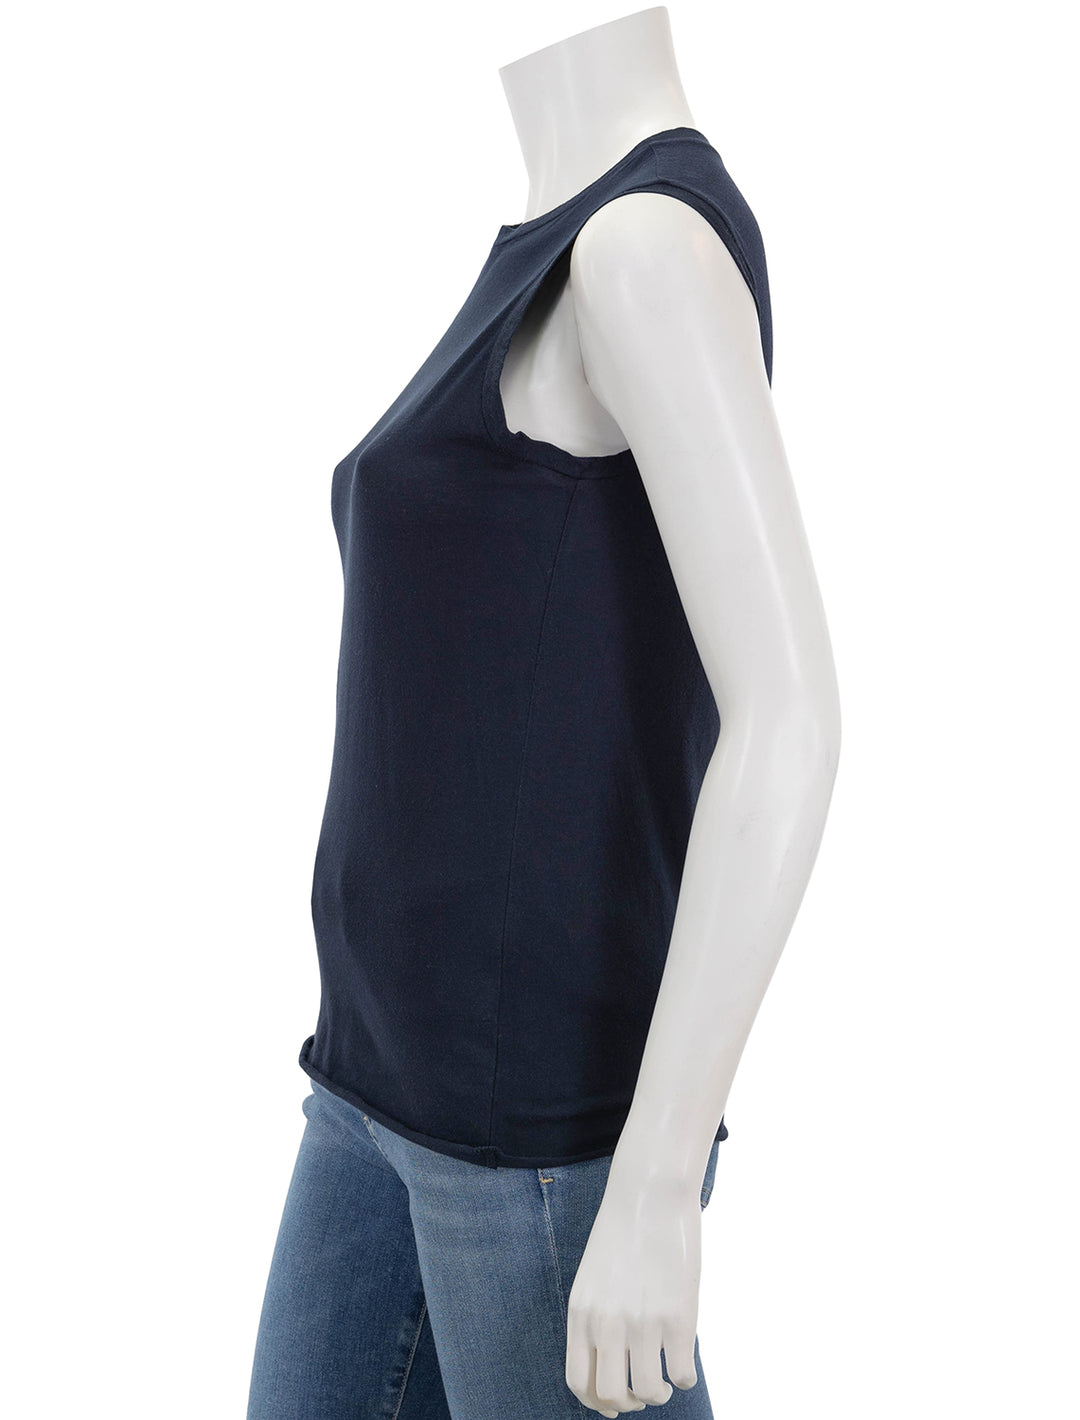 Side view of Nili Lotan's muscle tee in navy.